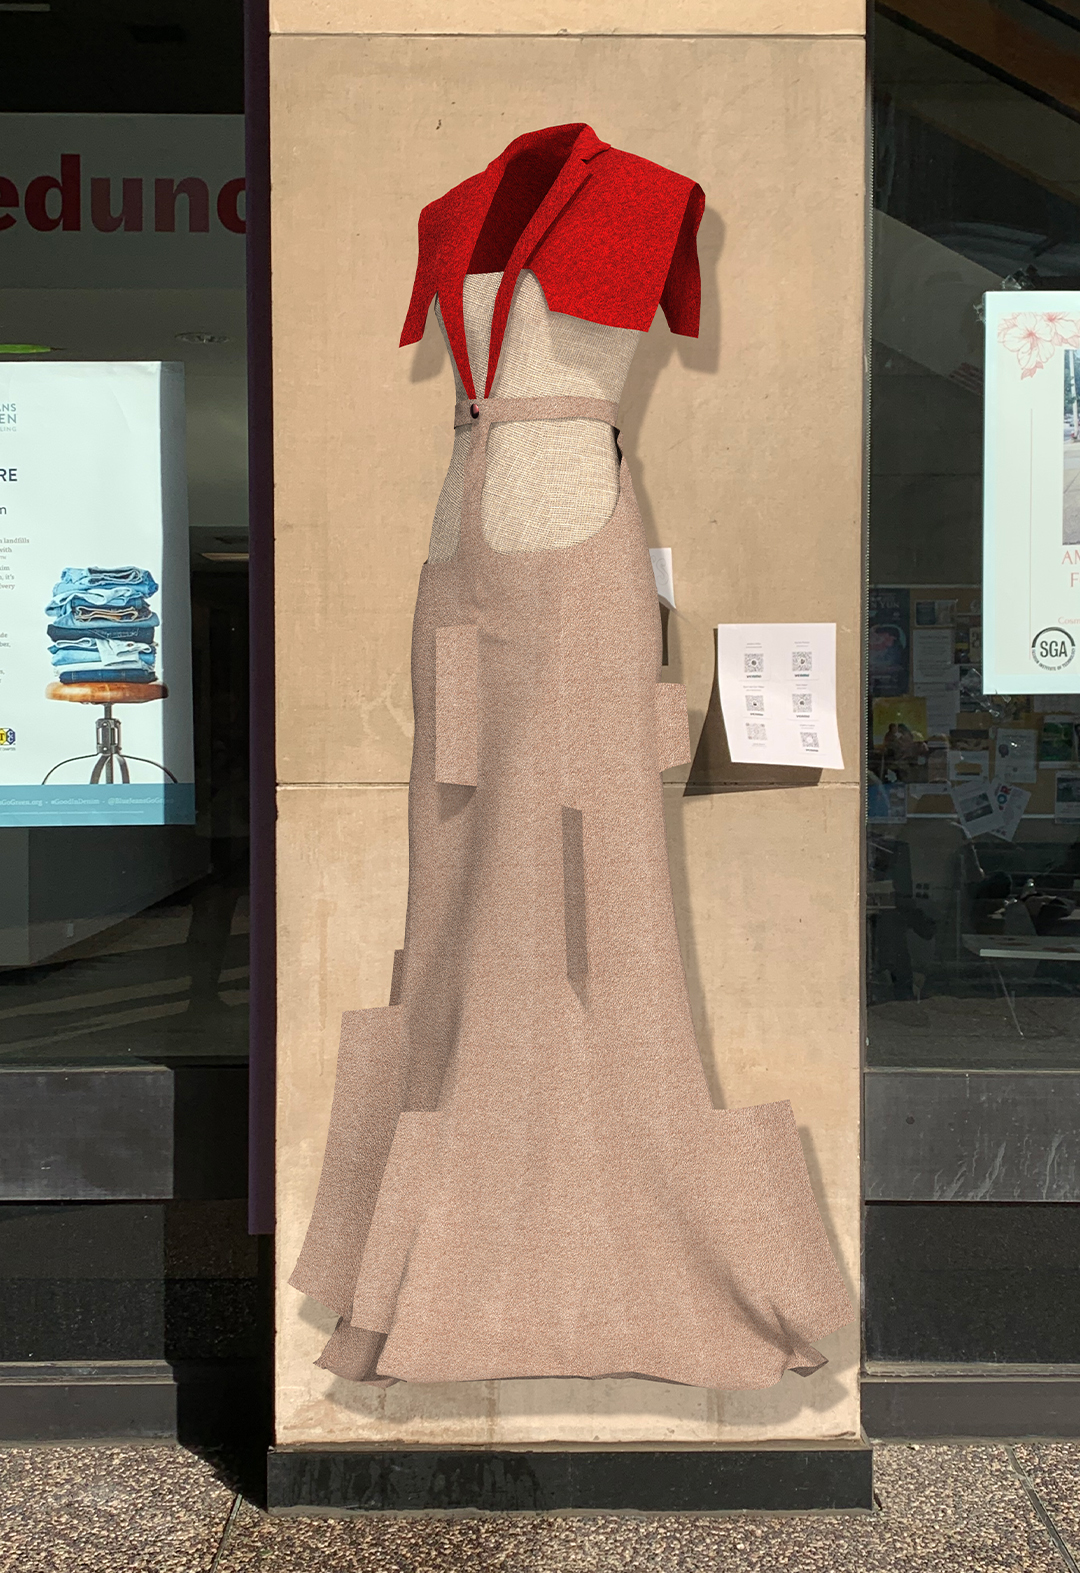 This is a digital outfit on top of a photo background. The outfit includes a red wool cape and a double-layer linen dress. The background is a concrete column and glass windows. 